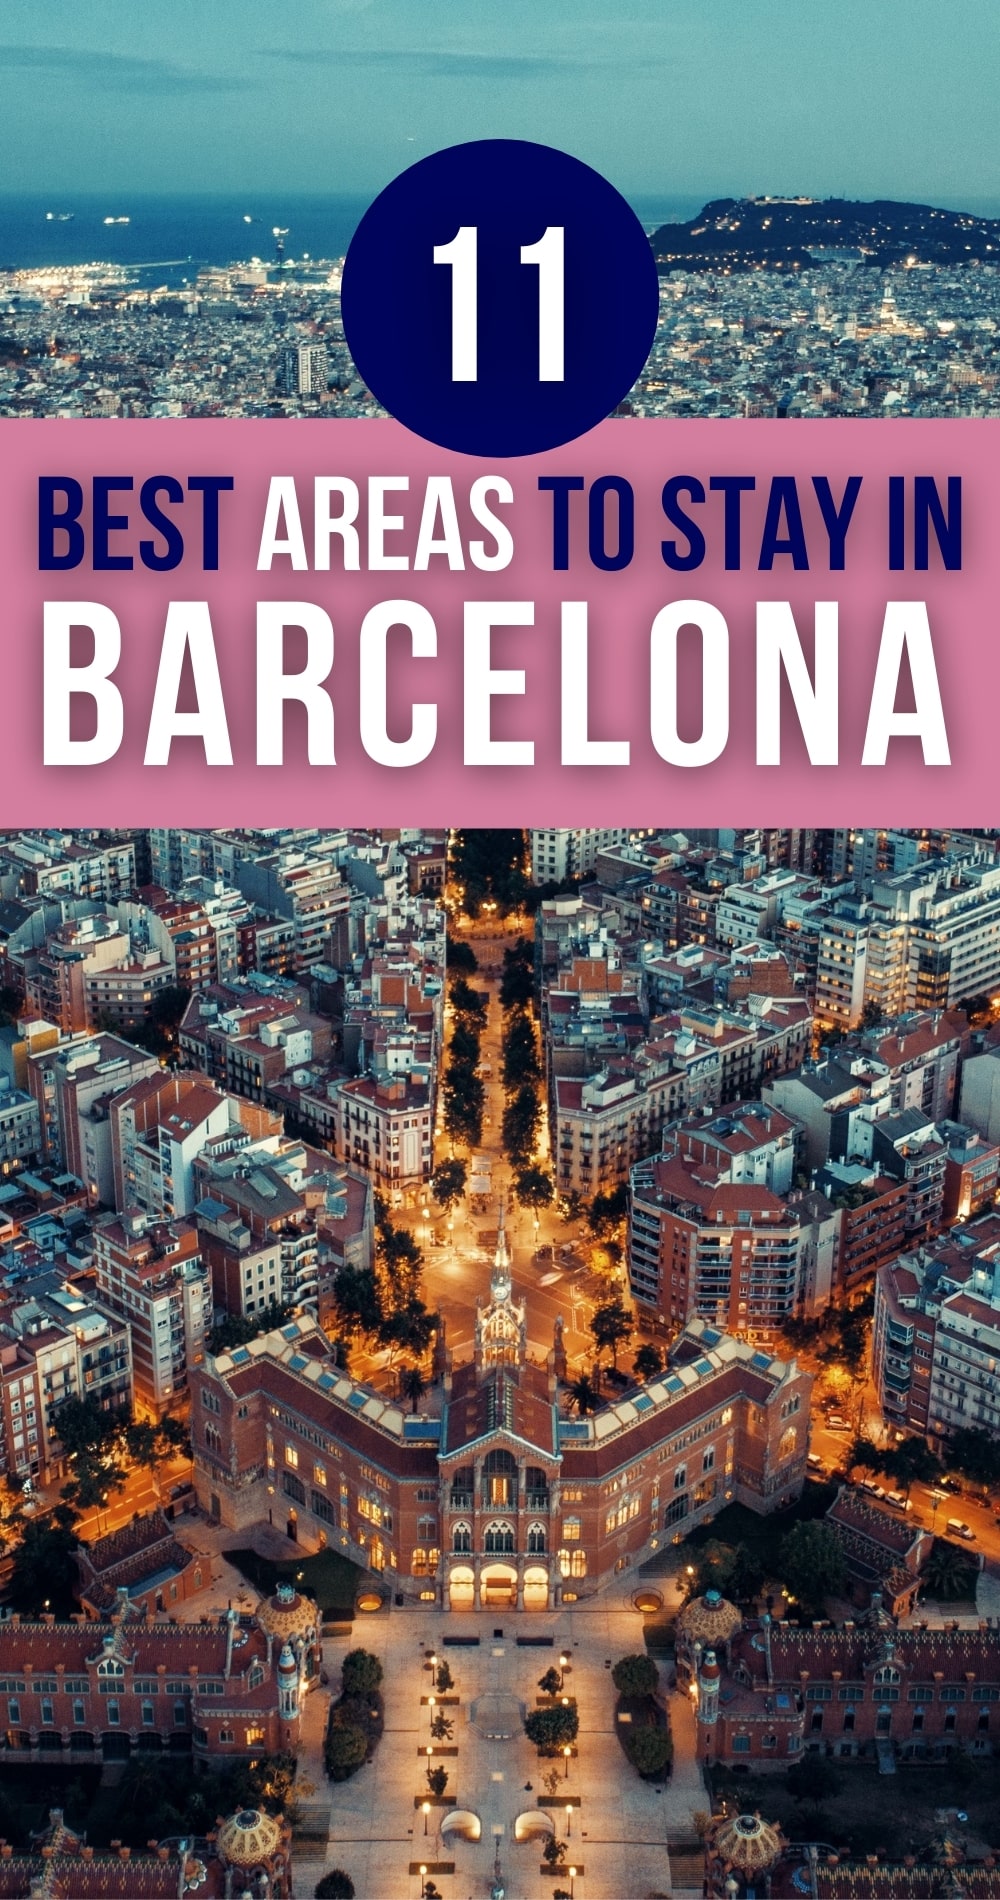 The 11 Best Areas to Stay in Barcelona for Tourists